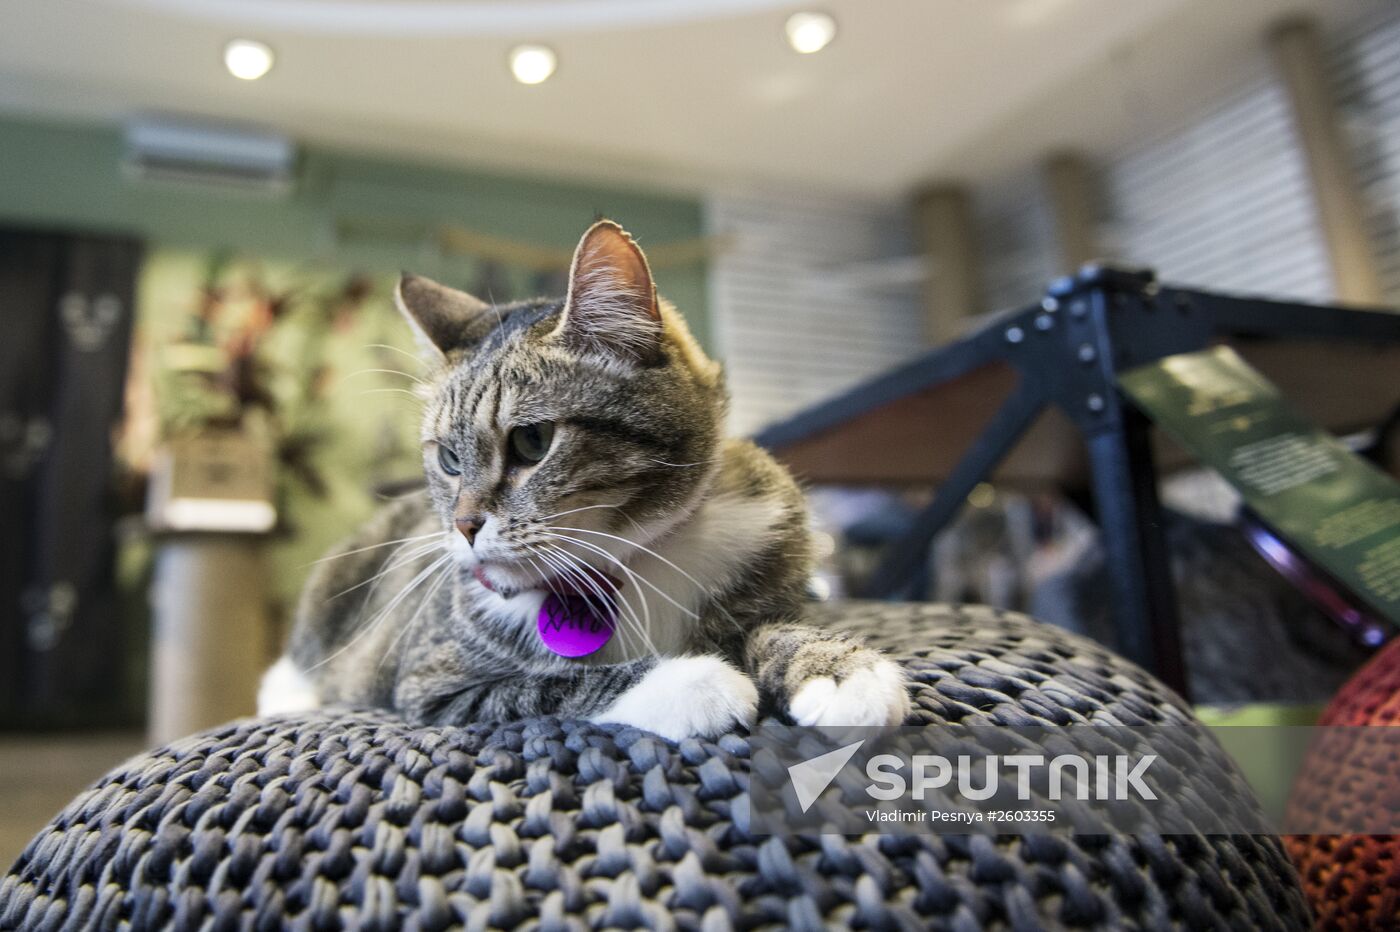 Catcafe "Cats and People"